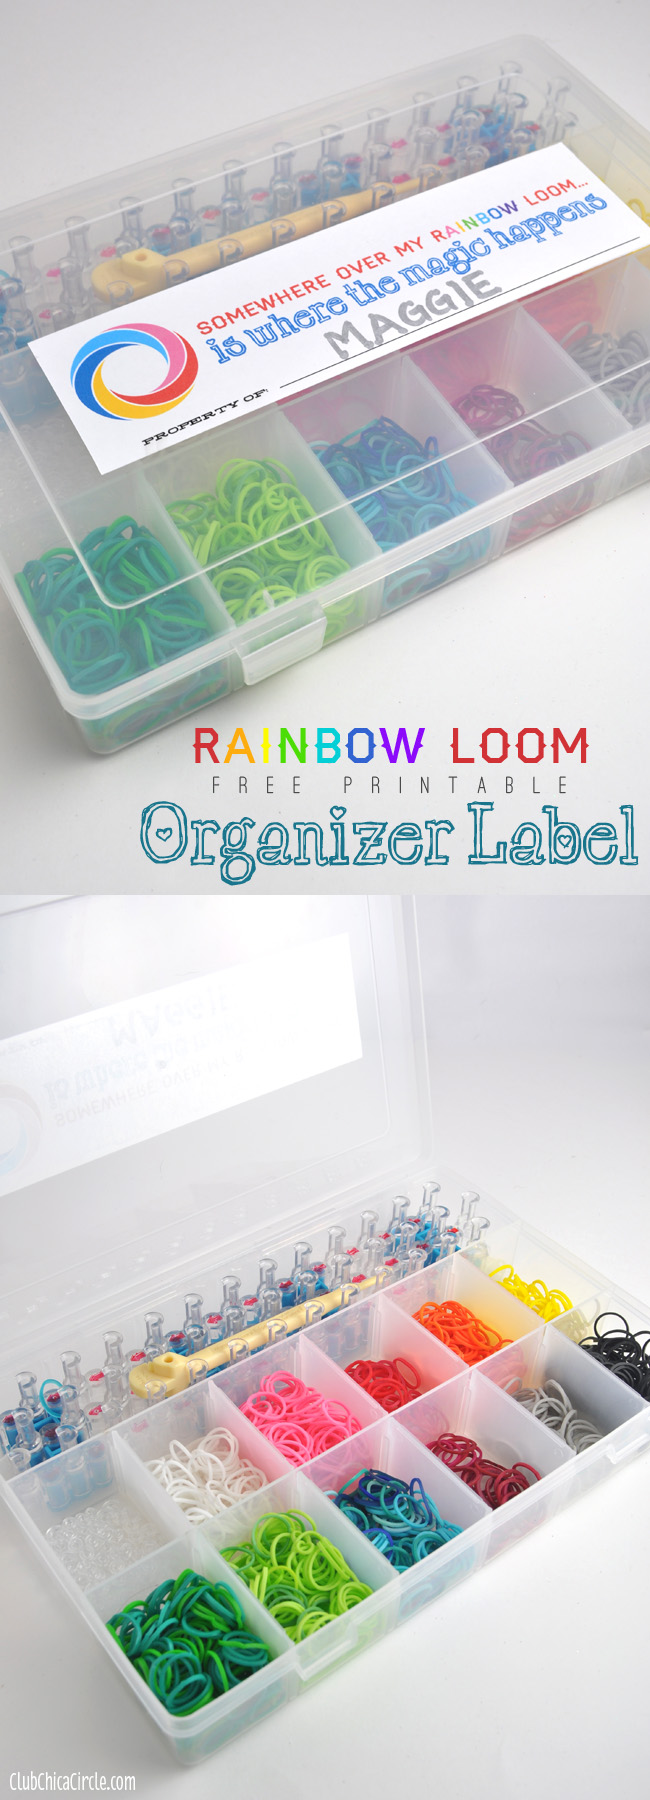 Rainbow Loom Organizer Free Printable Labels  Club Chica Circle - where  crafty is contagious